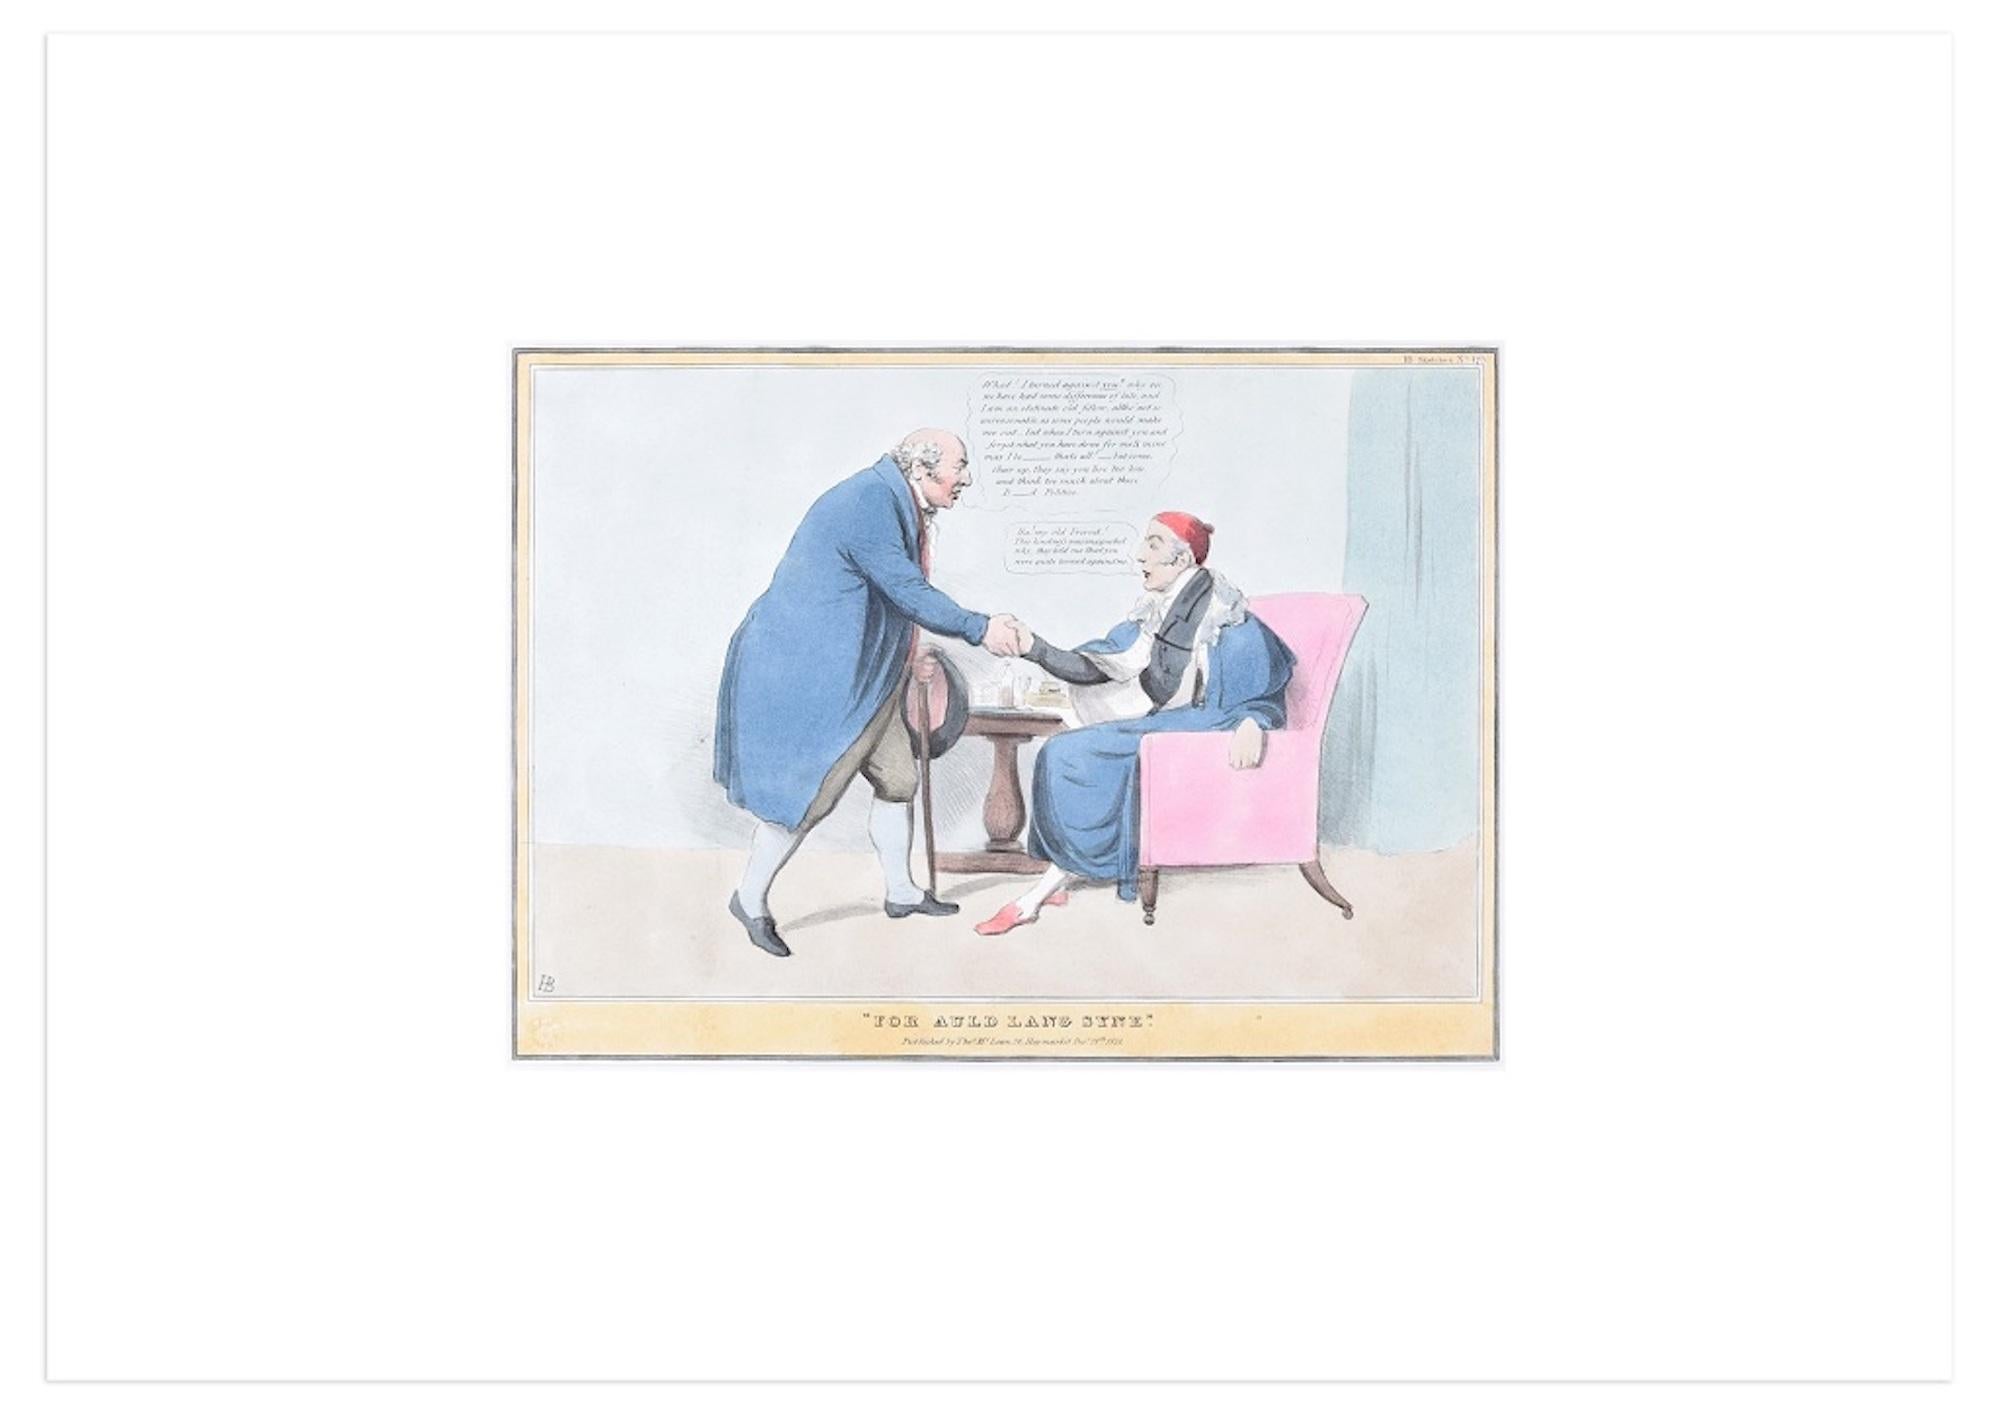 From the series Political Sketches.

John Doyle (1797-1868) was one of the most famous and prolific illustrator of the 19th century in Europe who was born in Ireland and active in London since 1822. For more than 20 years, in the first half of the